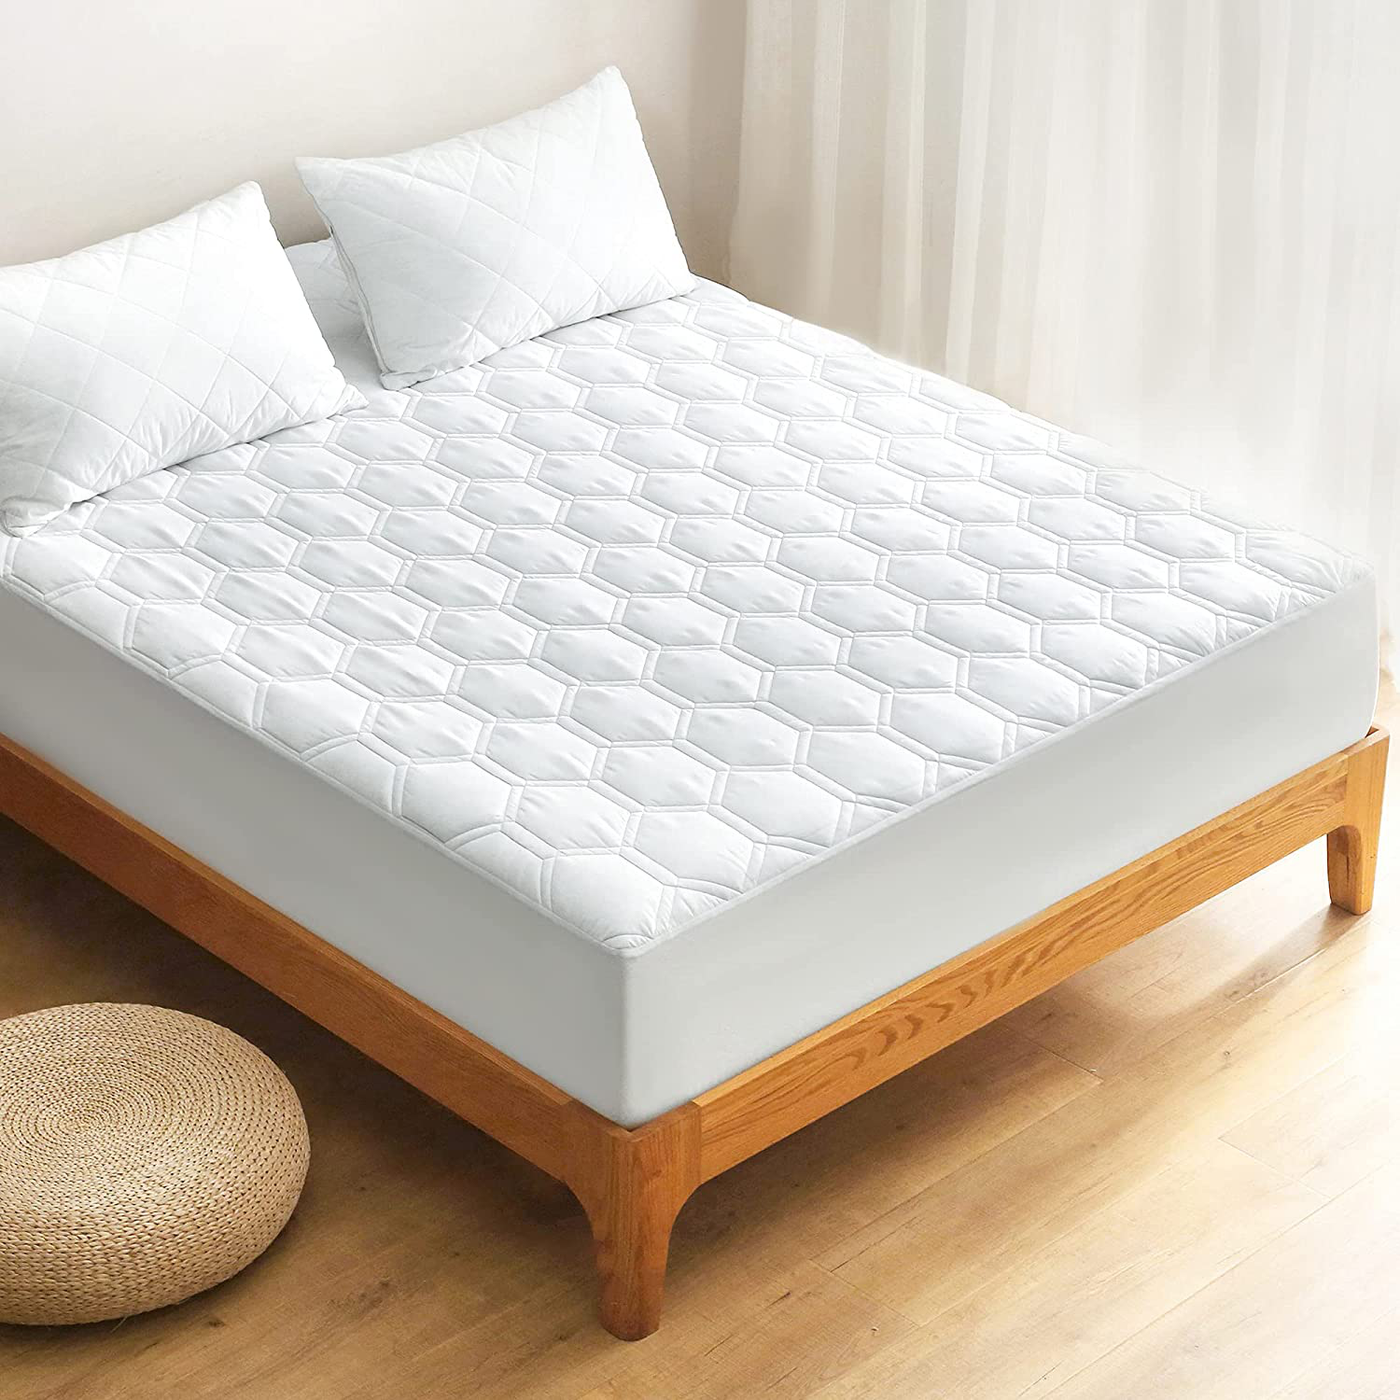 Waterproof Mattress Pad for California King Size Bed, Breathable Cal King Mattress Protector with 6-18 inches Deep Pocket, Quilted Alternative Hollow Cotton Filling Mattress Cover, White